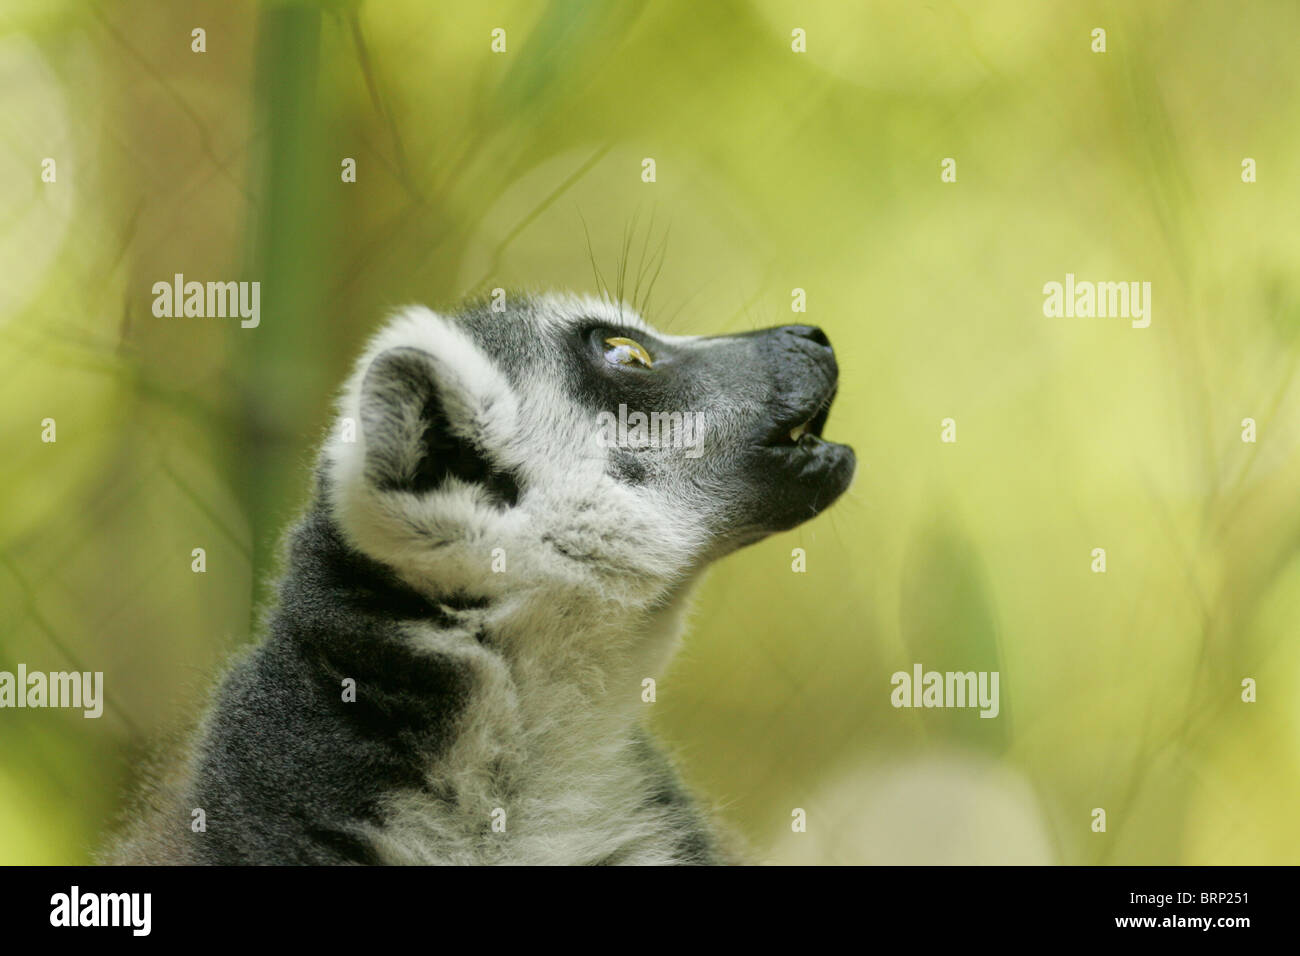 A Ring-tailed Lemur looking skywards with its mouth open Stock Photo